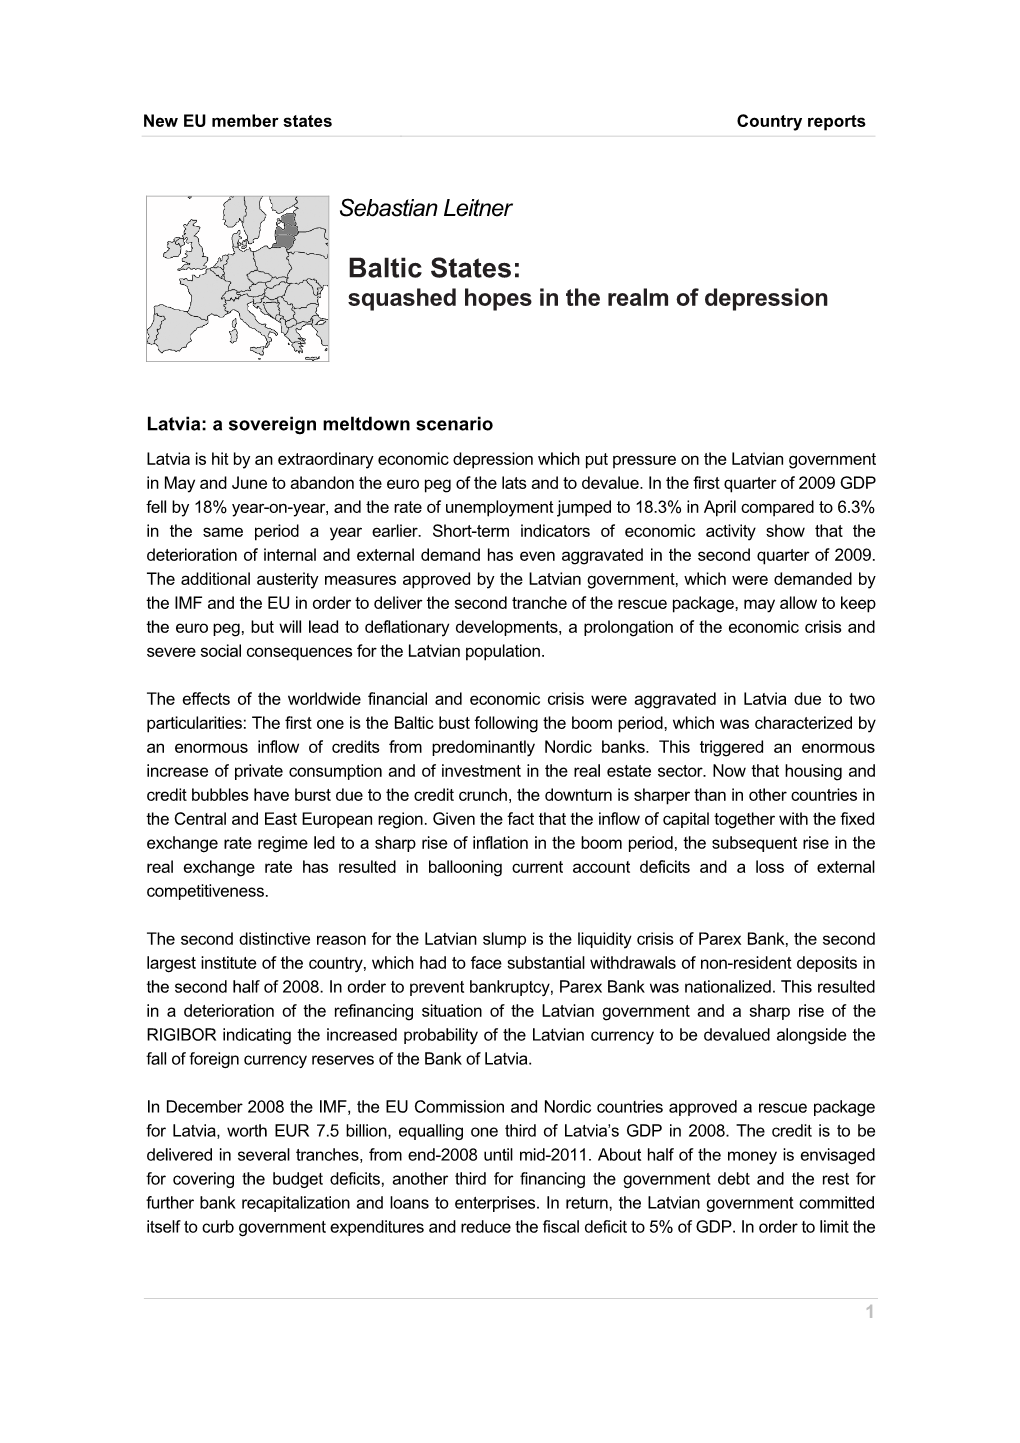 Baltic States: Squashed Hopes in the Realm of Depression